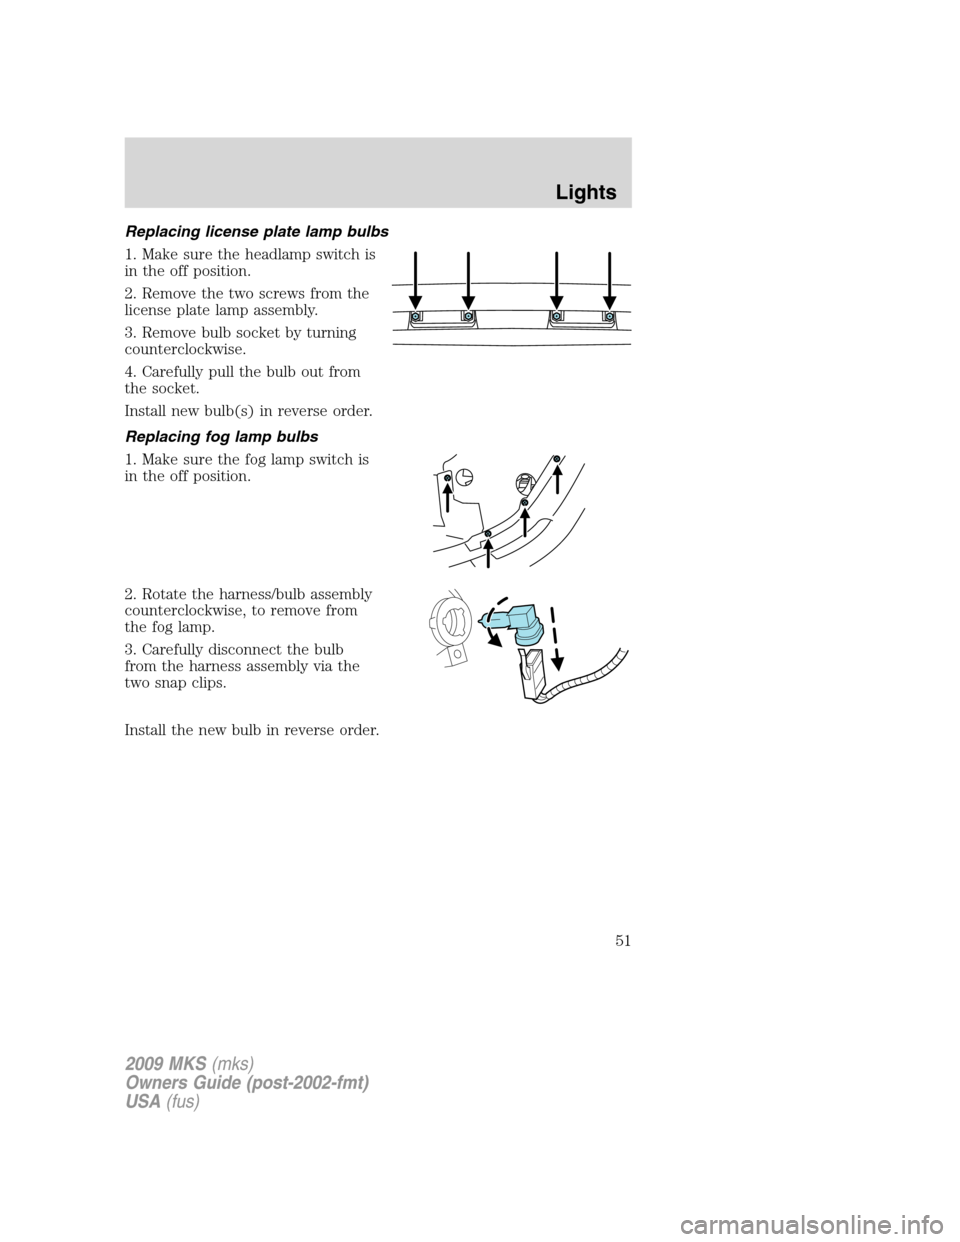 LINCOLN MKS 2009  Owners Manual Replacing license plate lamp bulbs
1. Make sure the headlamp switch is
in the off position.
2. Remove the two screws from the
license plate lamp assembly.
3. Remove bulb socket by turning
counterclock